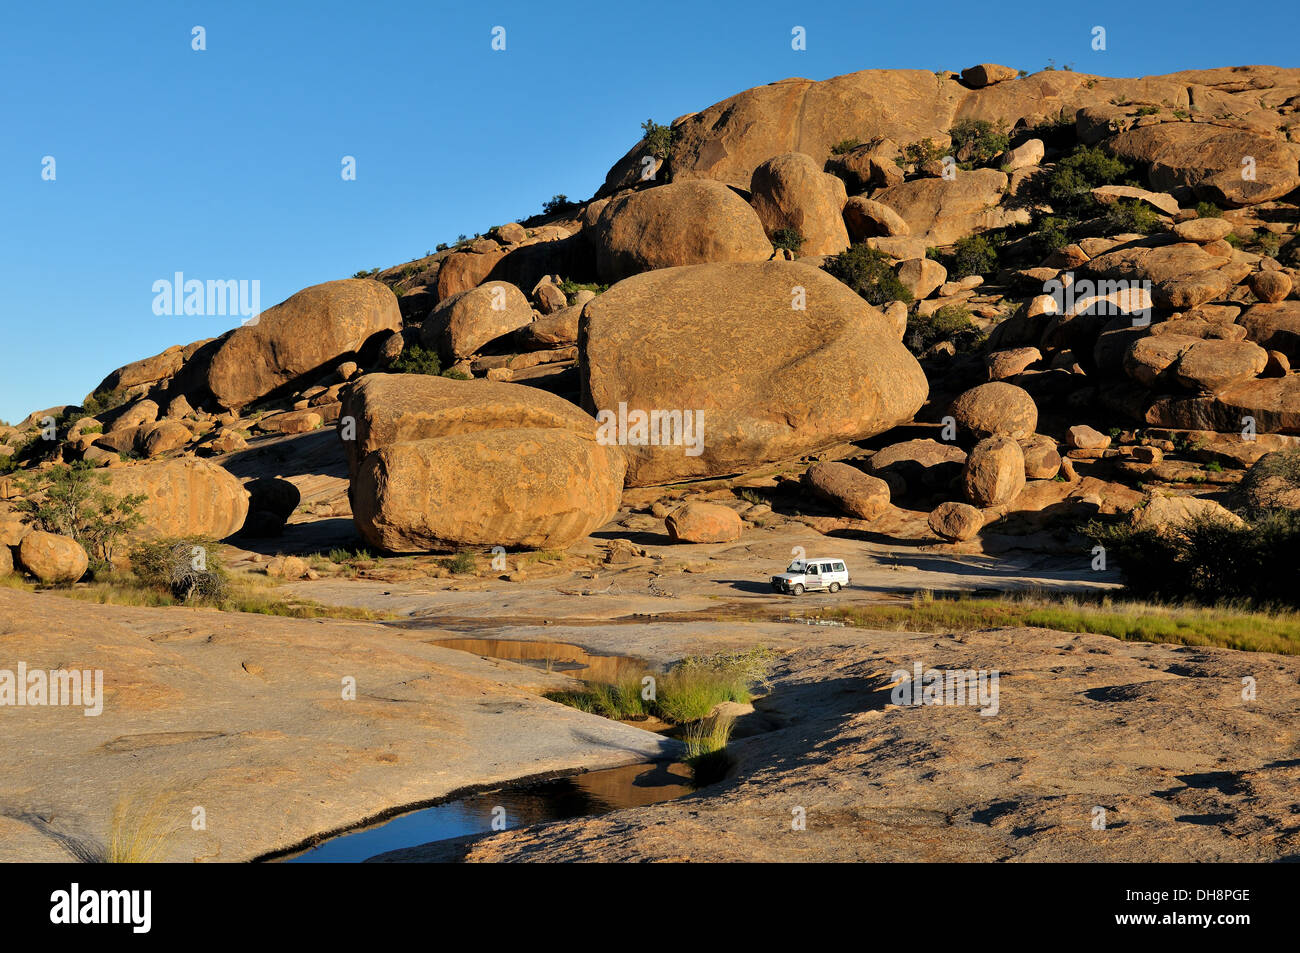 Bull's Party, a group of huge boulders, at Ameib in the Erongo Mountains near Usakos, Namibia Stock Photo